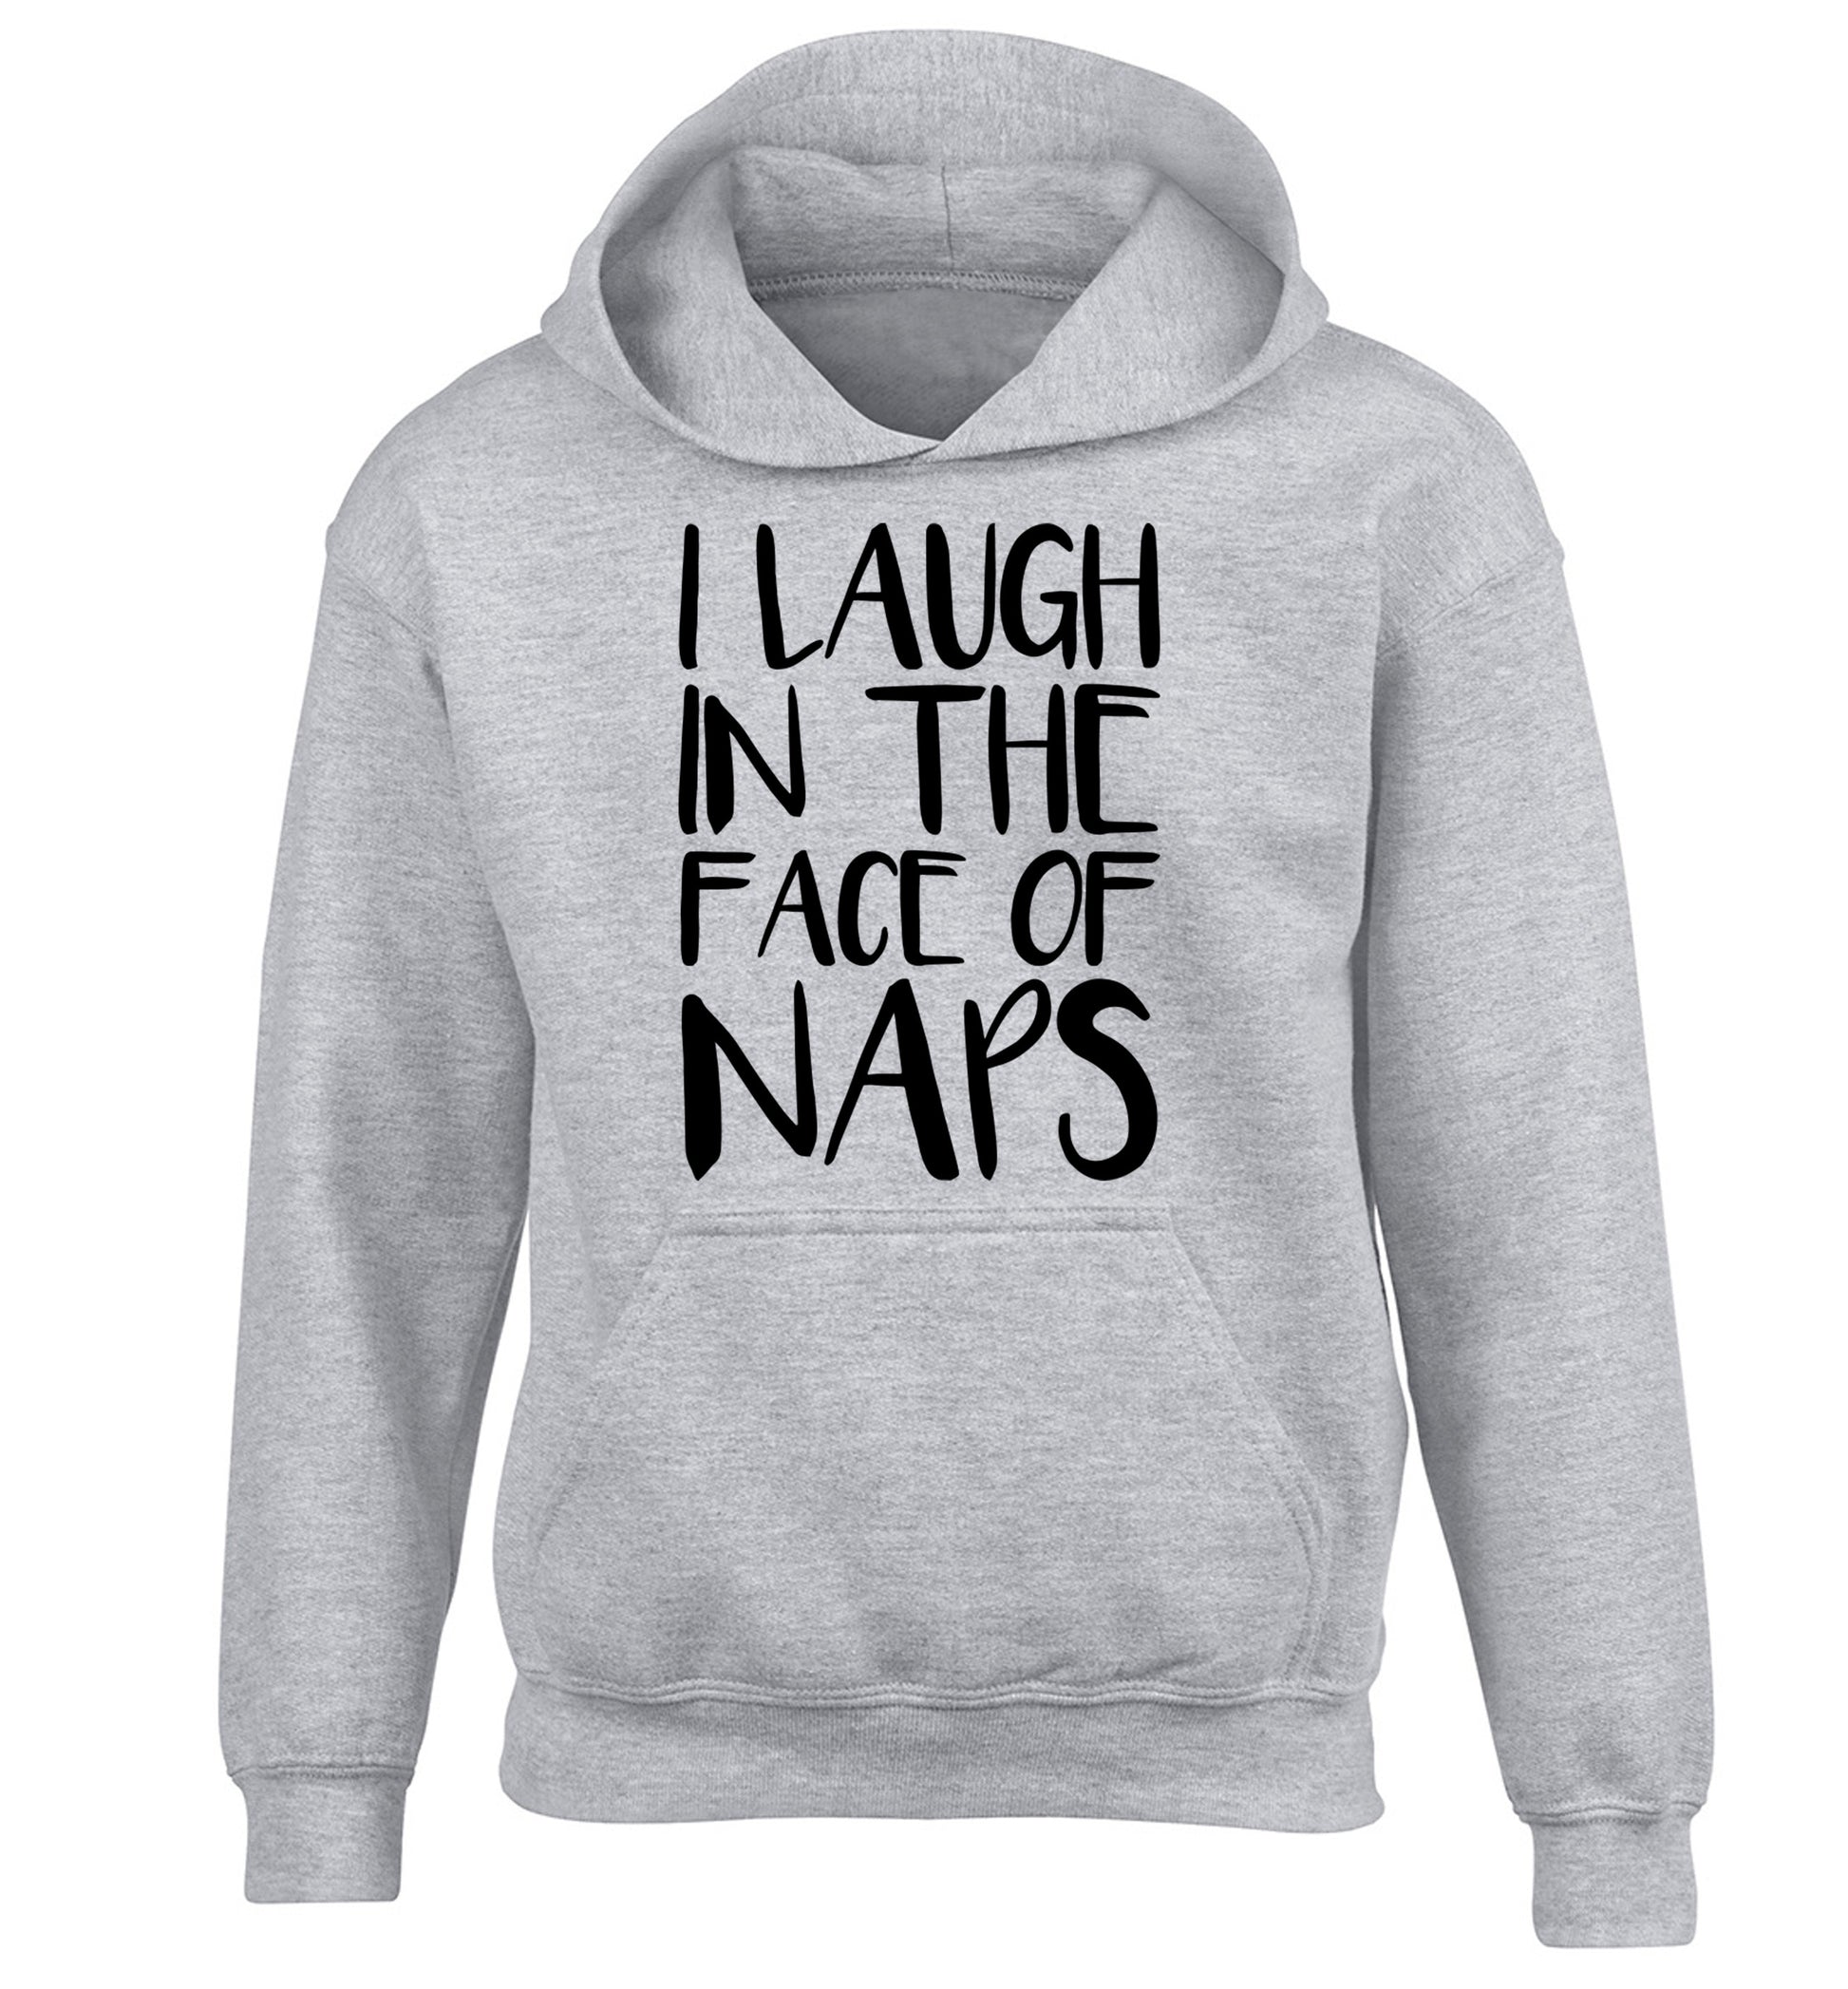 I laugh in the face of naps children's grey hoodie 12-14 Years